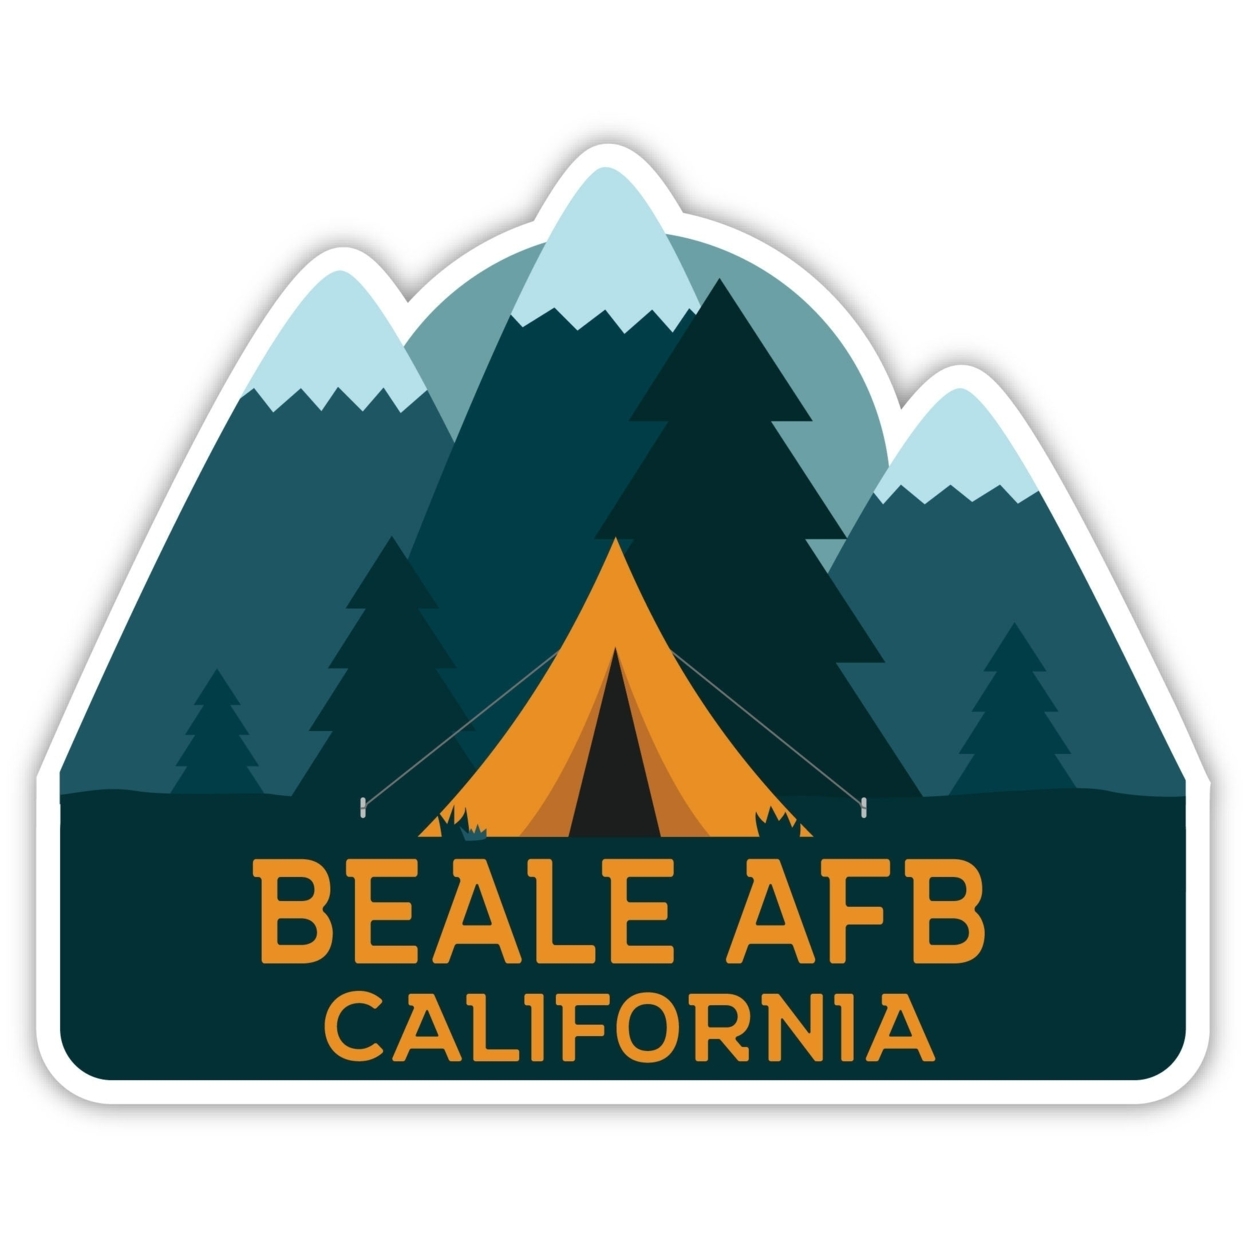 Beale AFB California Souvenir Decorative Stickers (Choose Theme And Size) - 4-Pack, 12-Inch, Tent